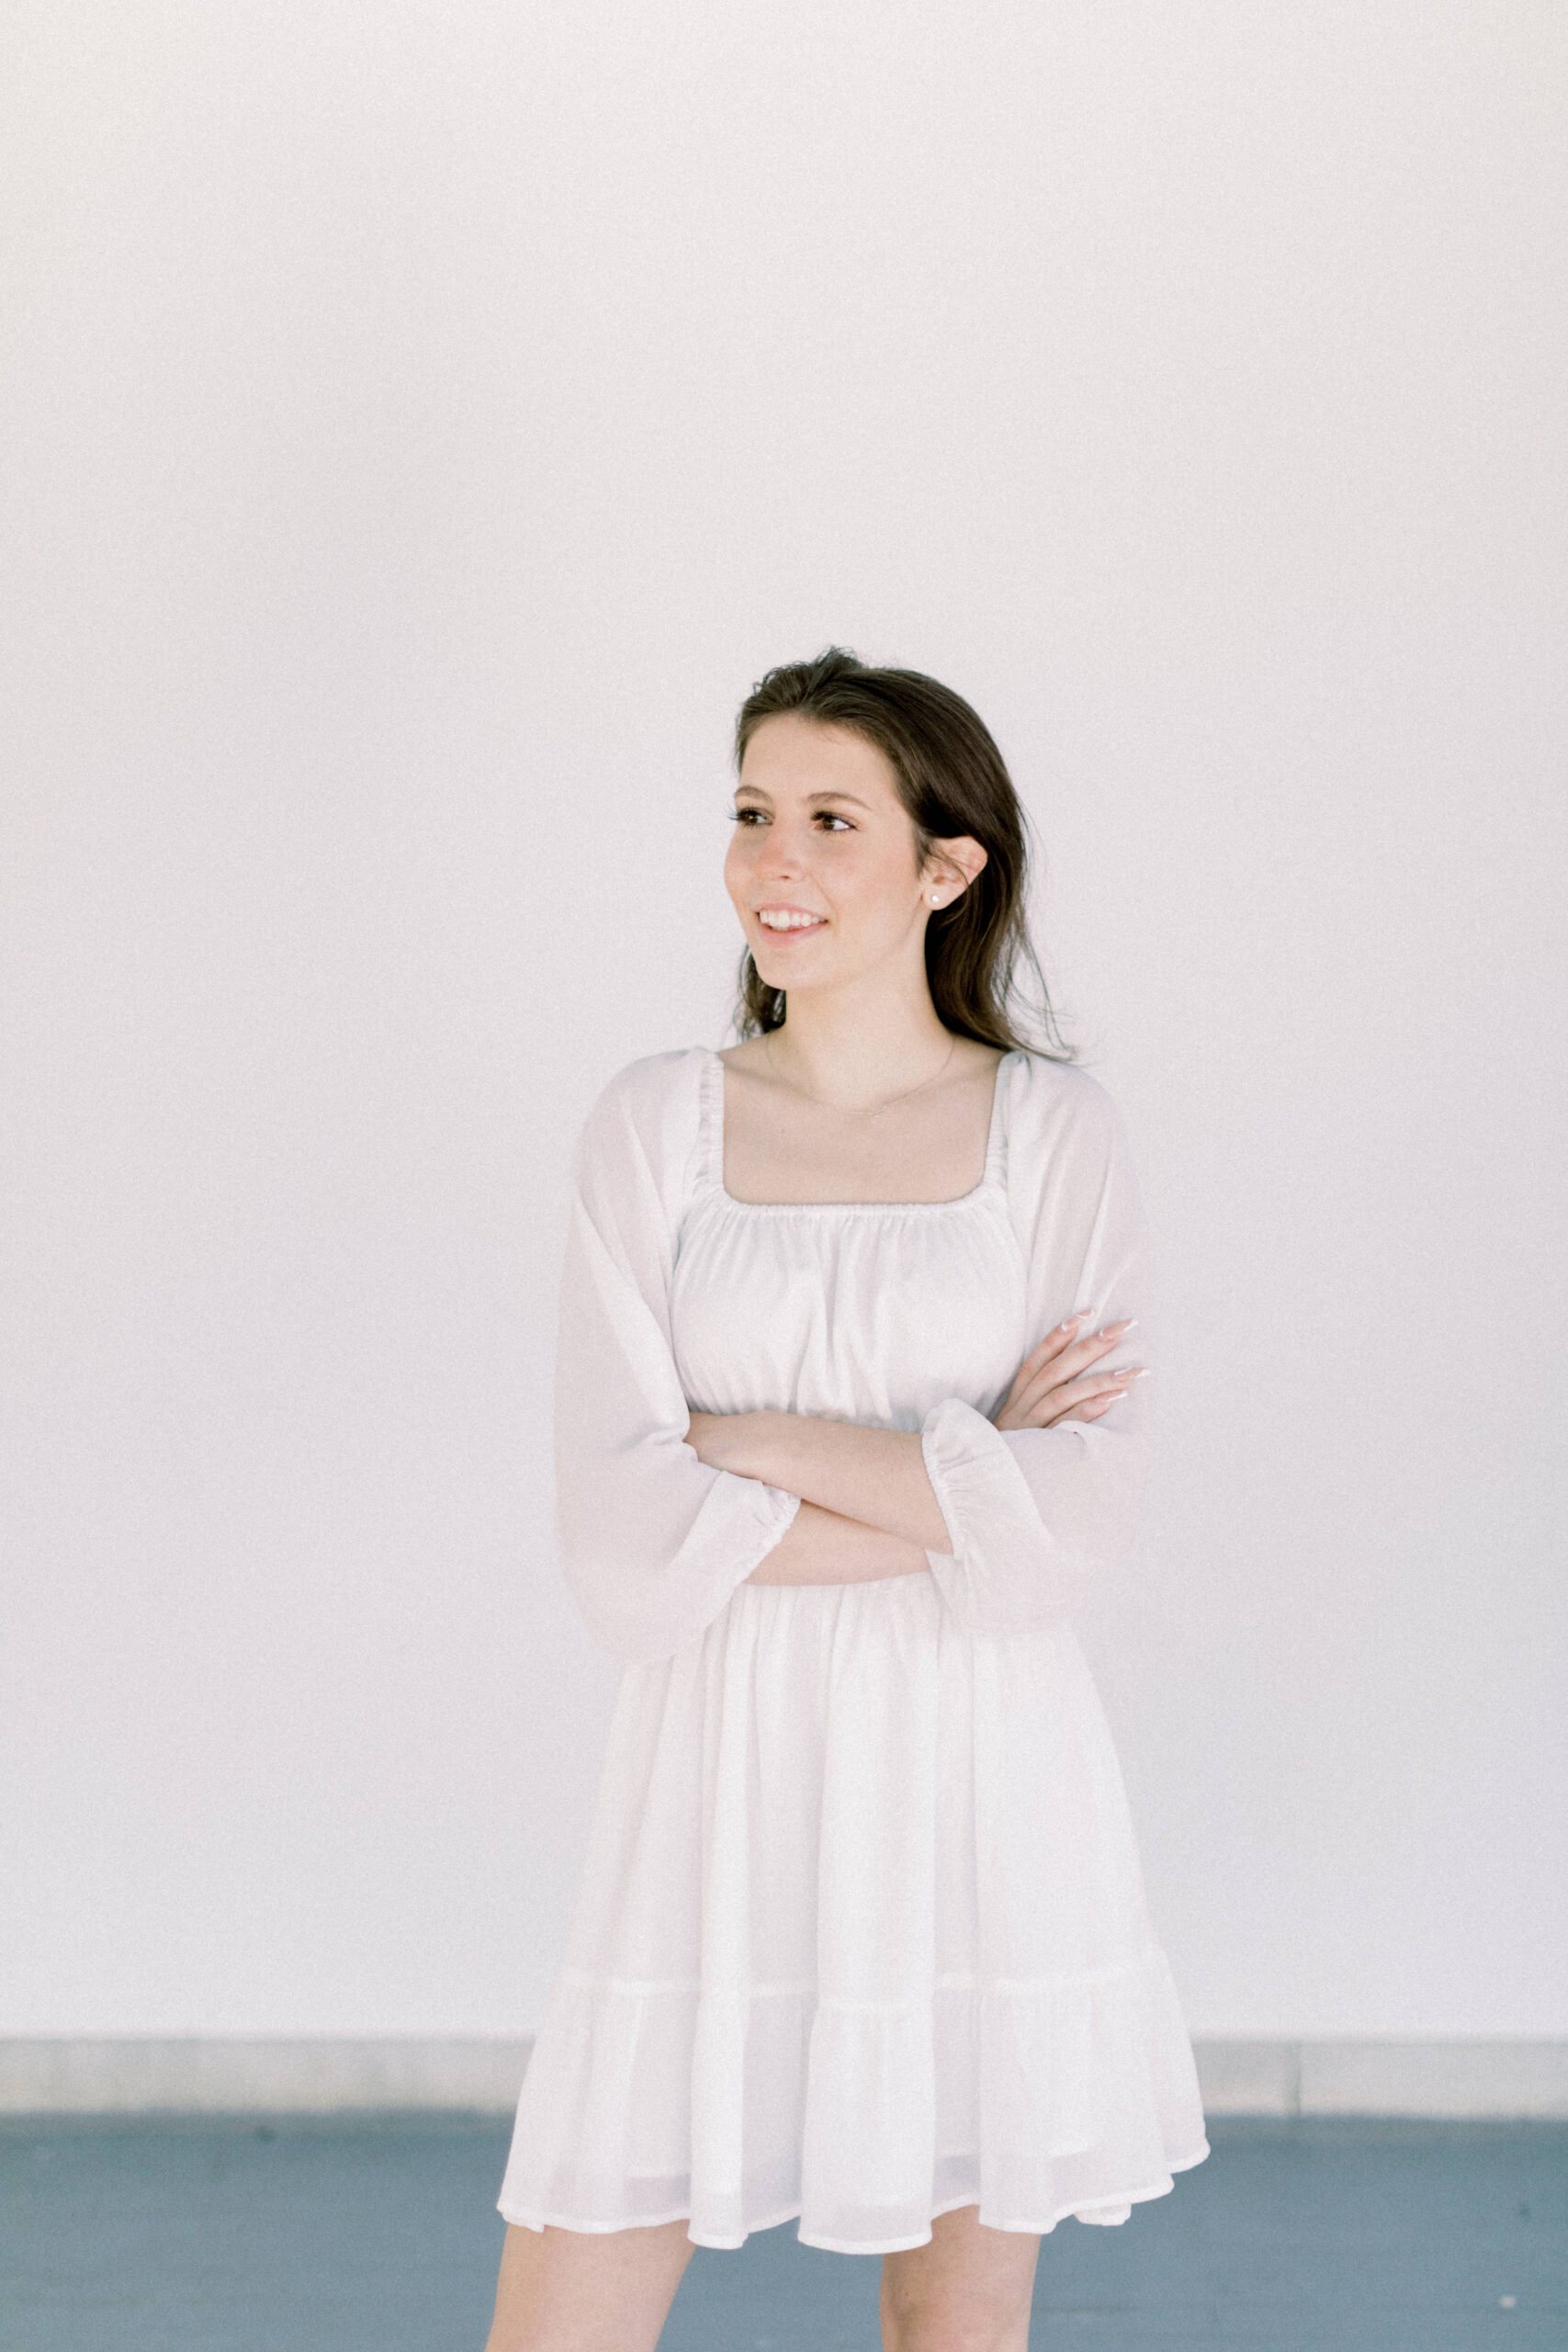 Maryland photographer captures young woman wearing white dress during photos